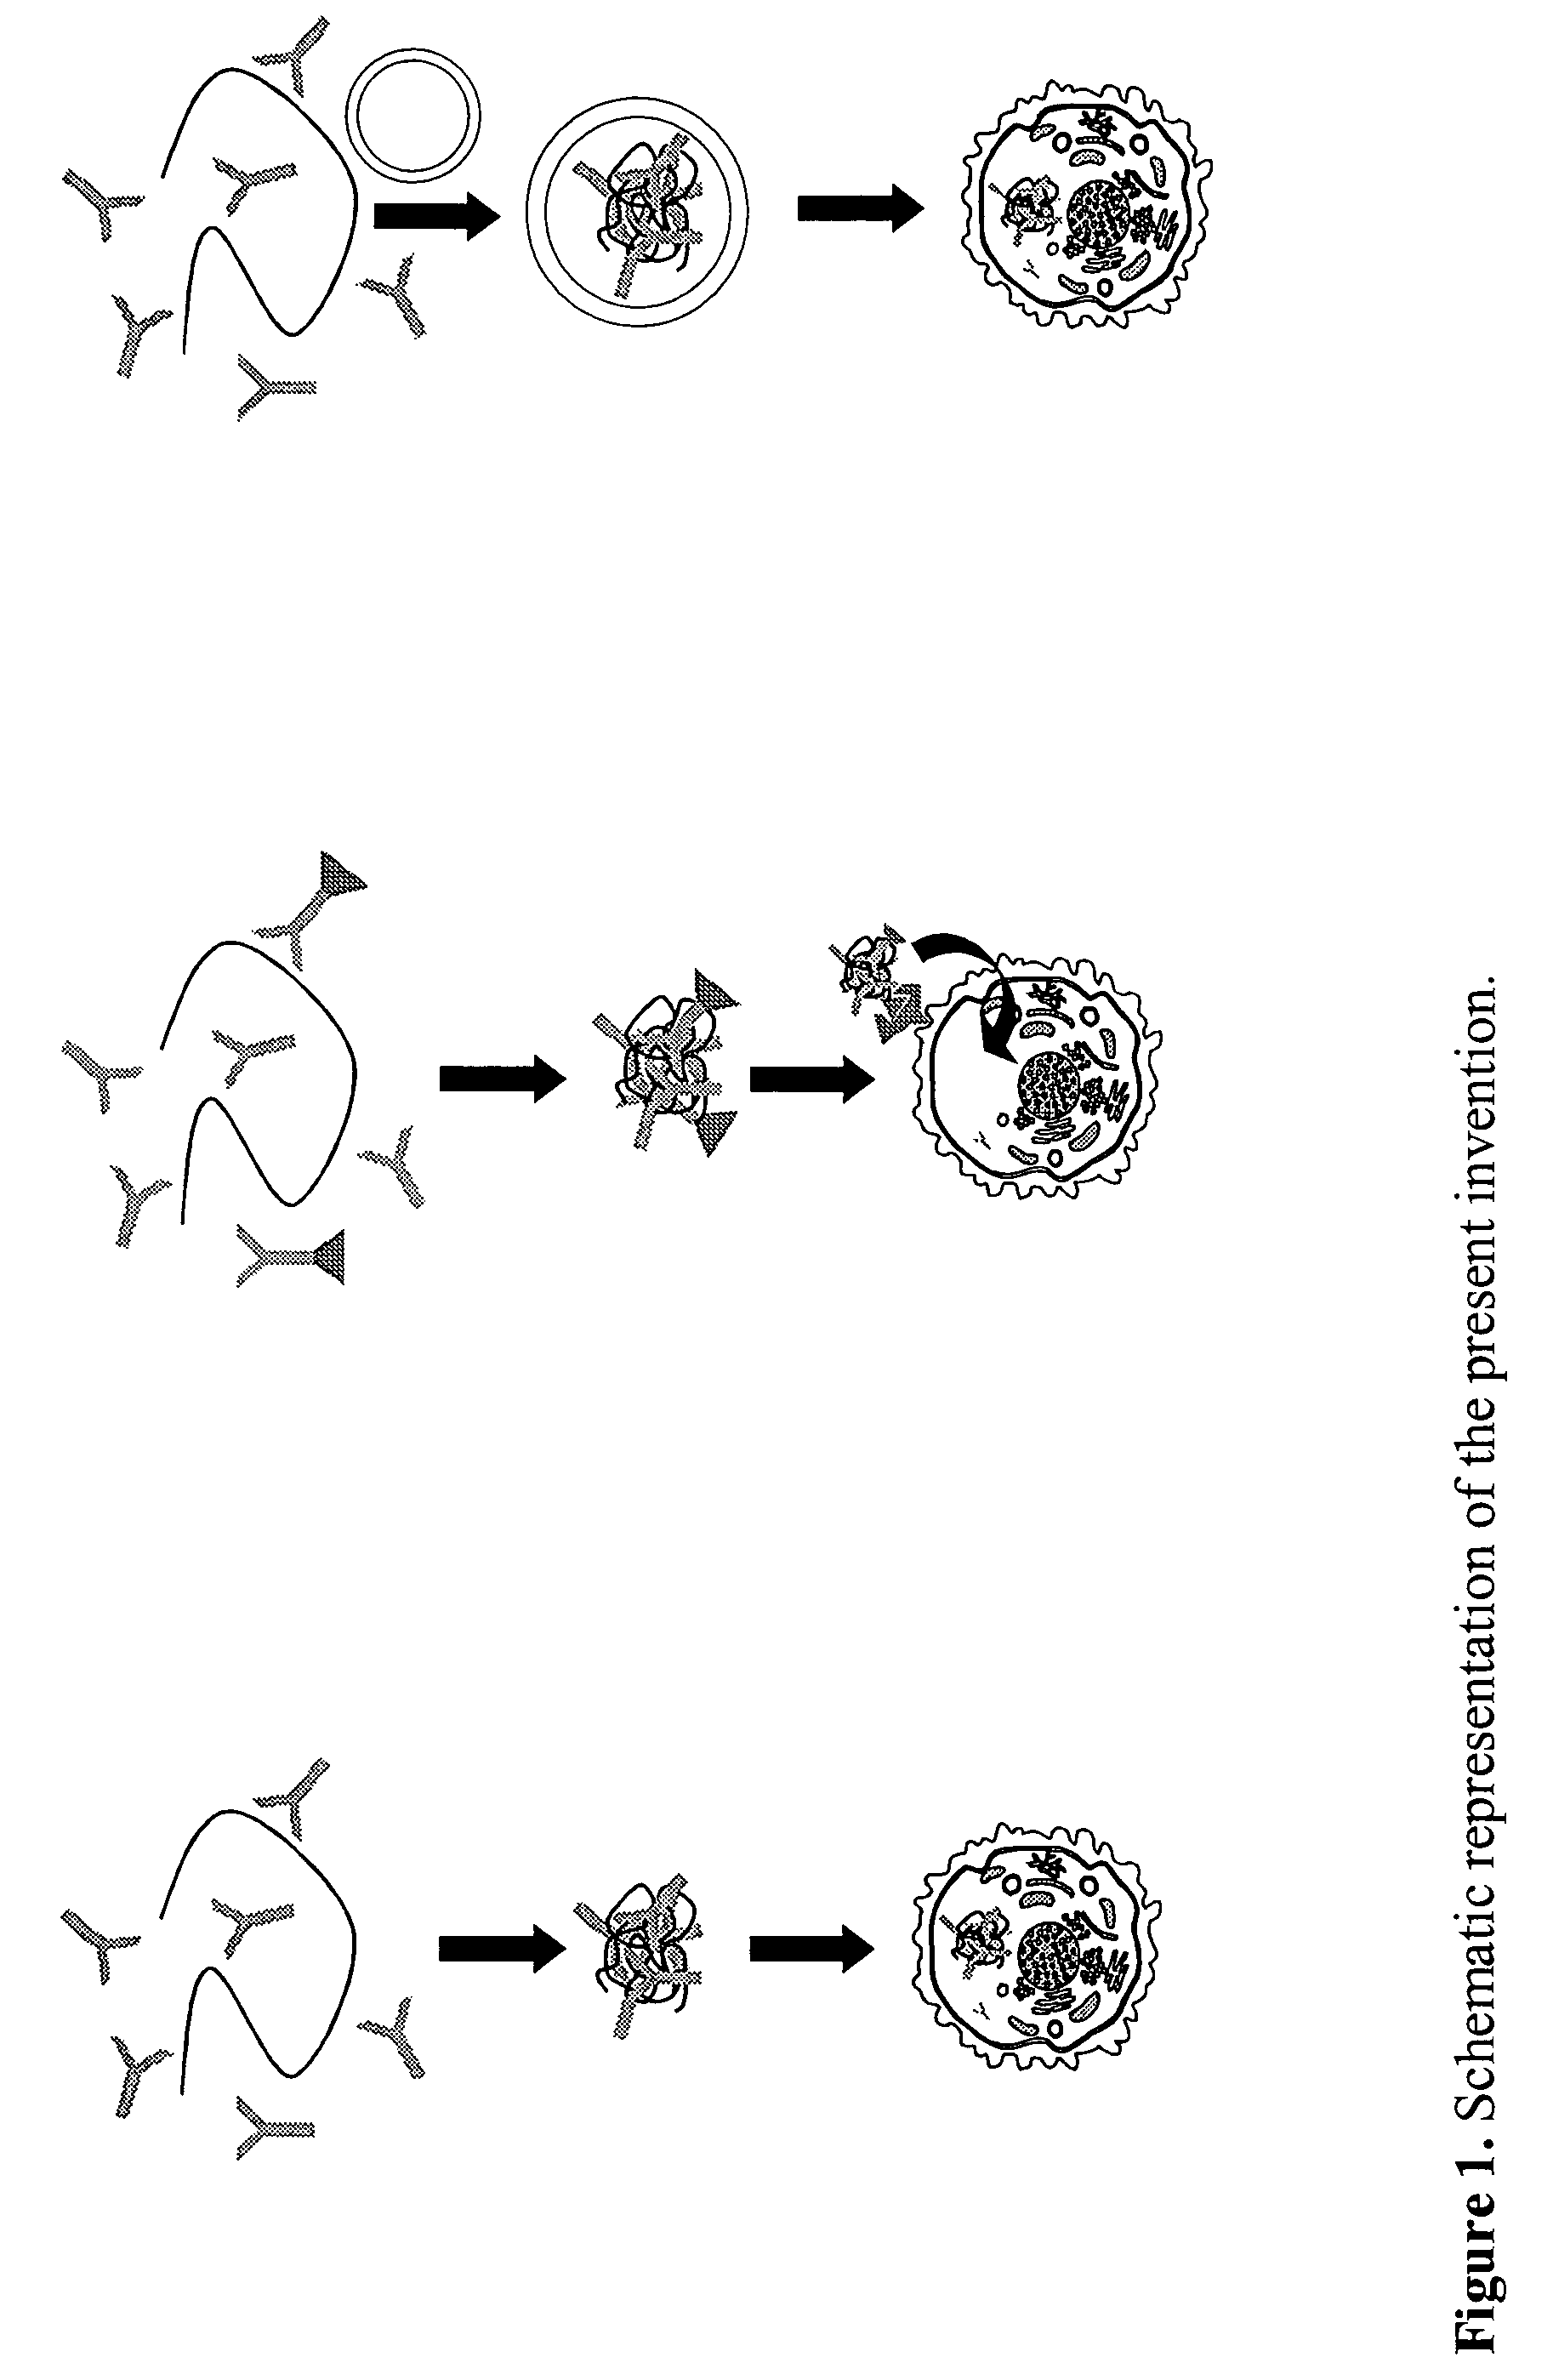 Method for transfer of molecular substances with prokaryotic nucleic acid-binding proteins